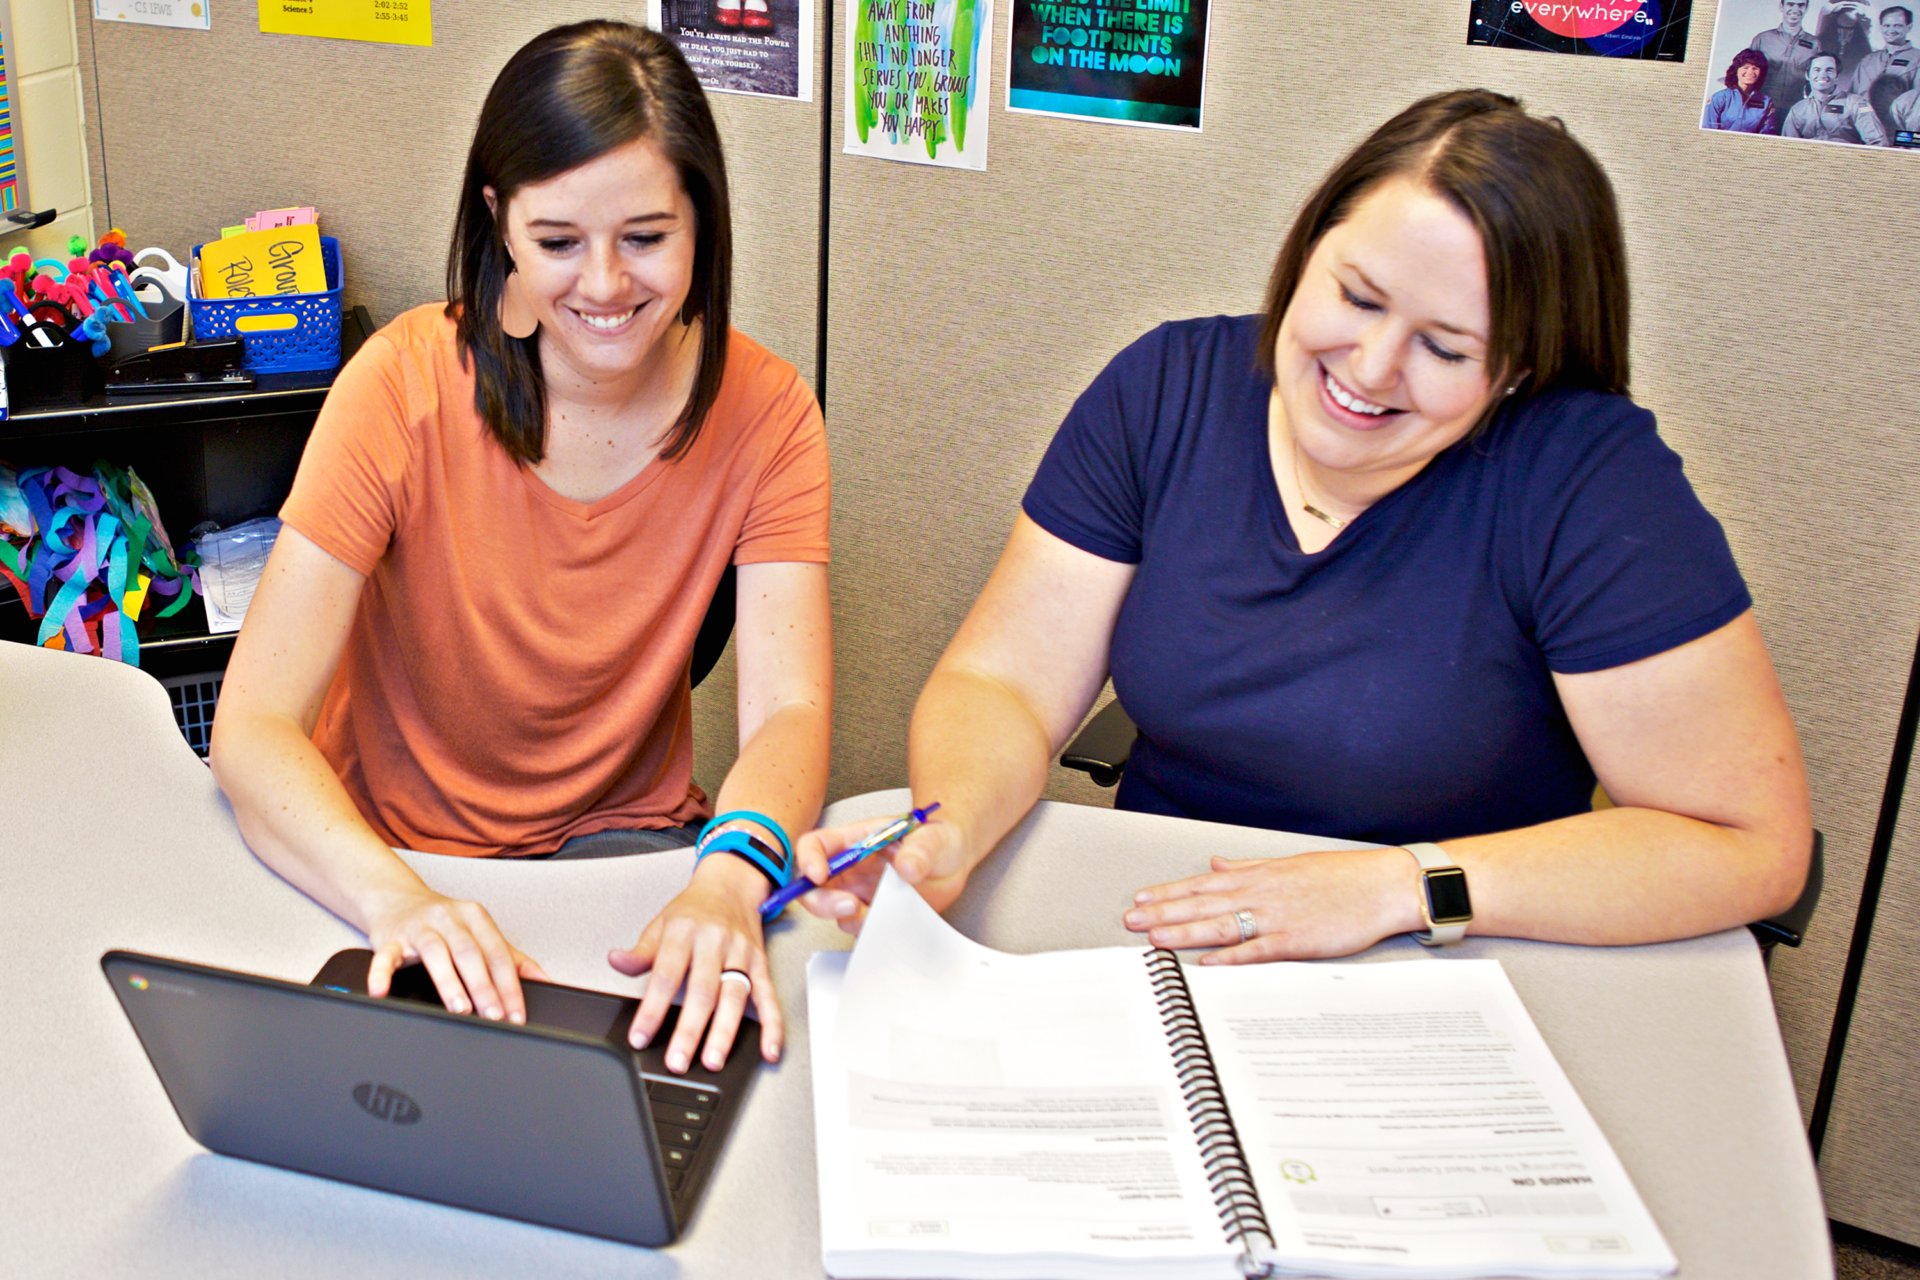 Two women in an office, one using a laptop and another with a notebook, smiling and discussing tutoring services.